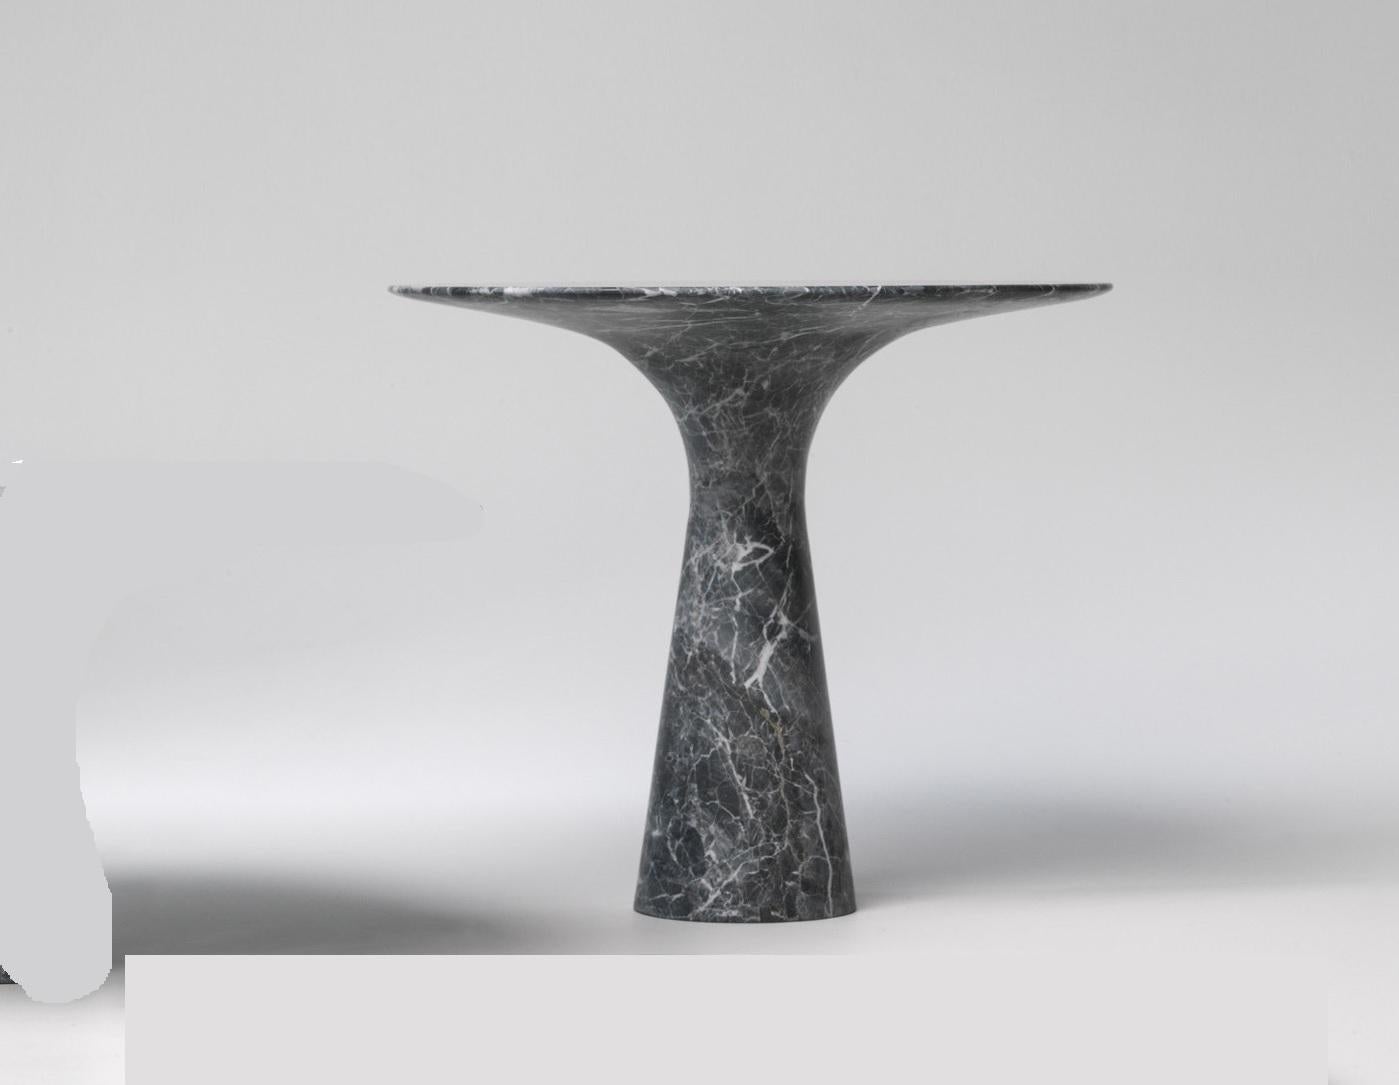 Refined Contemporary Marble 03 Grey Saint Laurent Marble Cake Stand
Signed by Leo Aerts.
Dimensions: diameter 26 x height 22.5 cm 
Material: grey saint laurent marble
Technique: polished, carved. 
Available in marble: kyknos, bianco statuarietto,